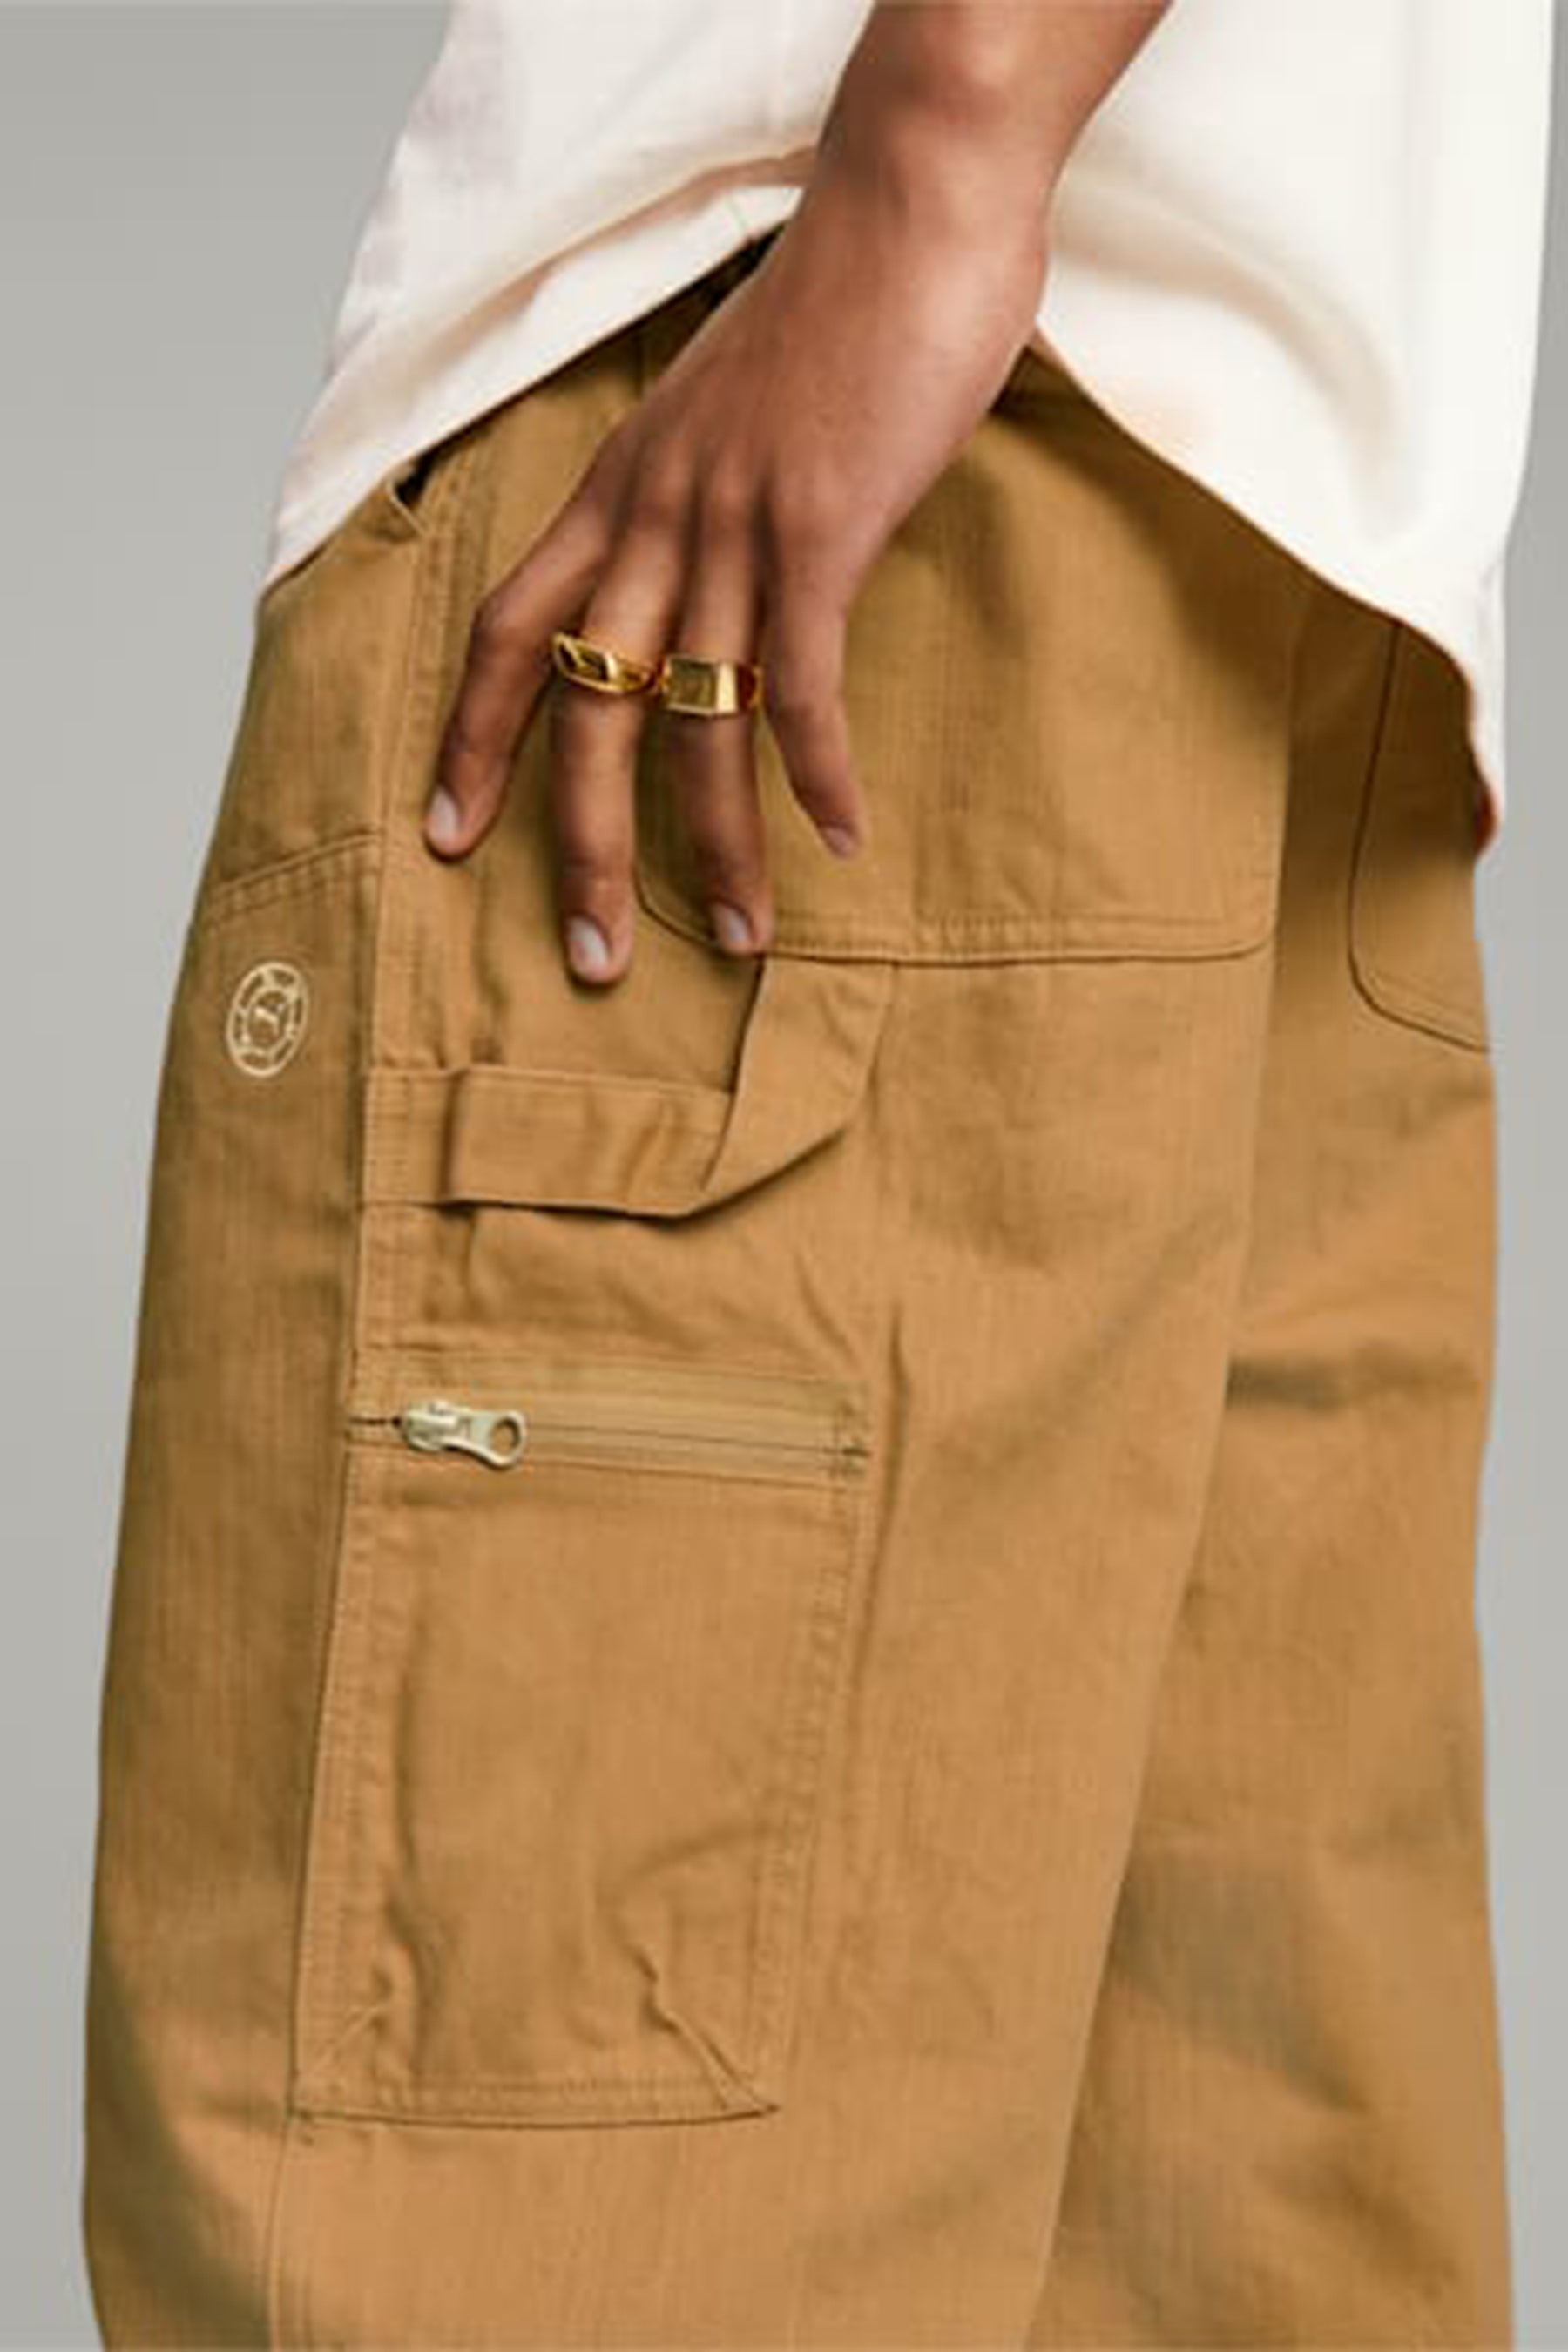 Carhartt WIP x RAMIDUS Fanny Pack M WIP White in Cotton - US